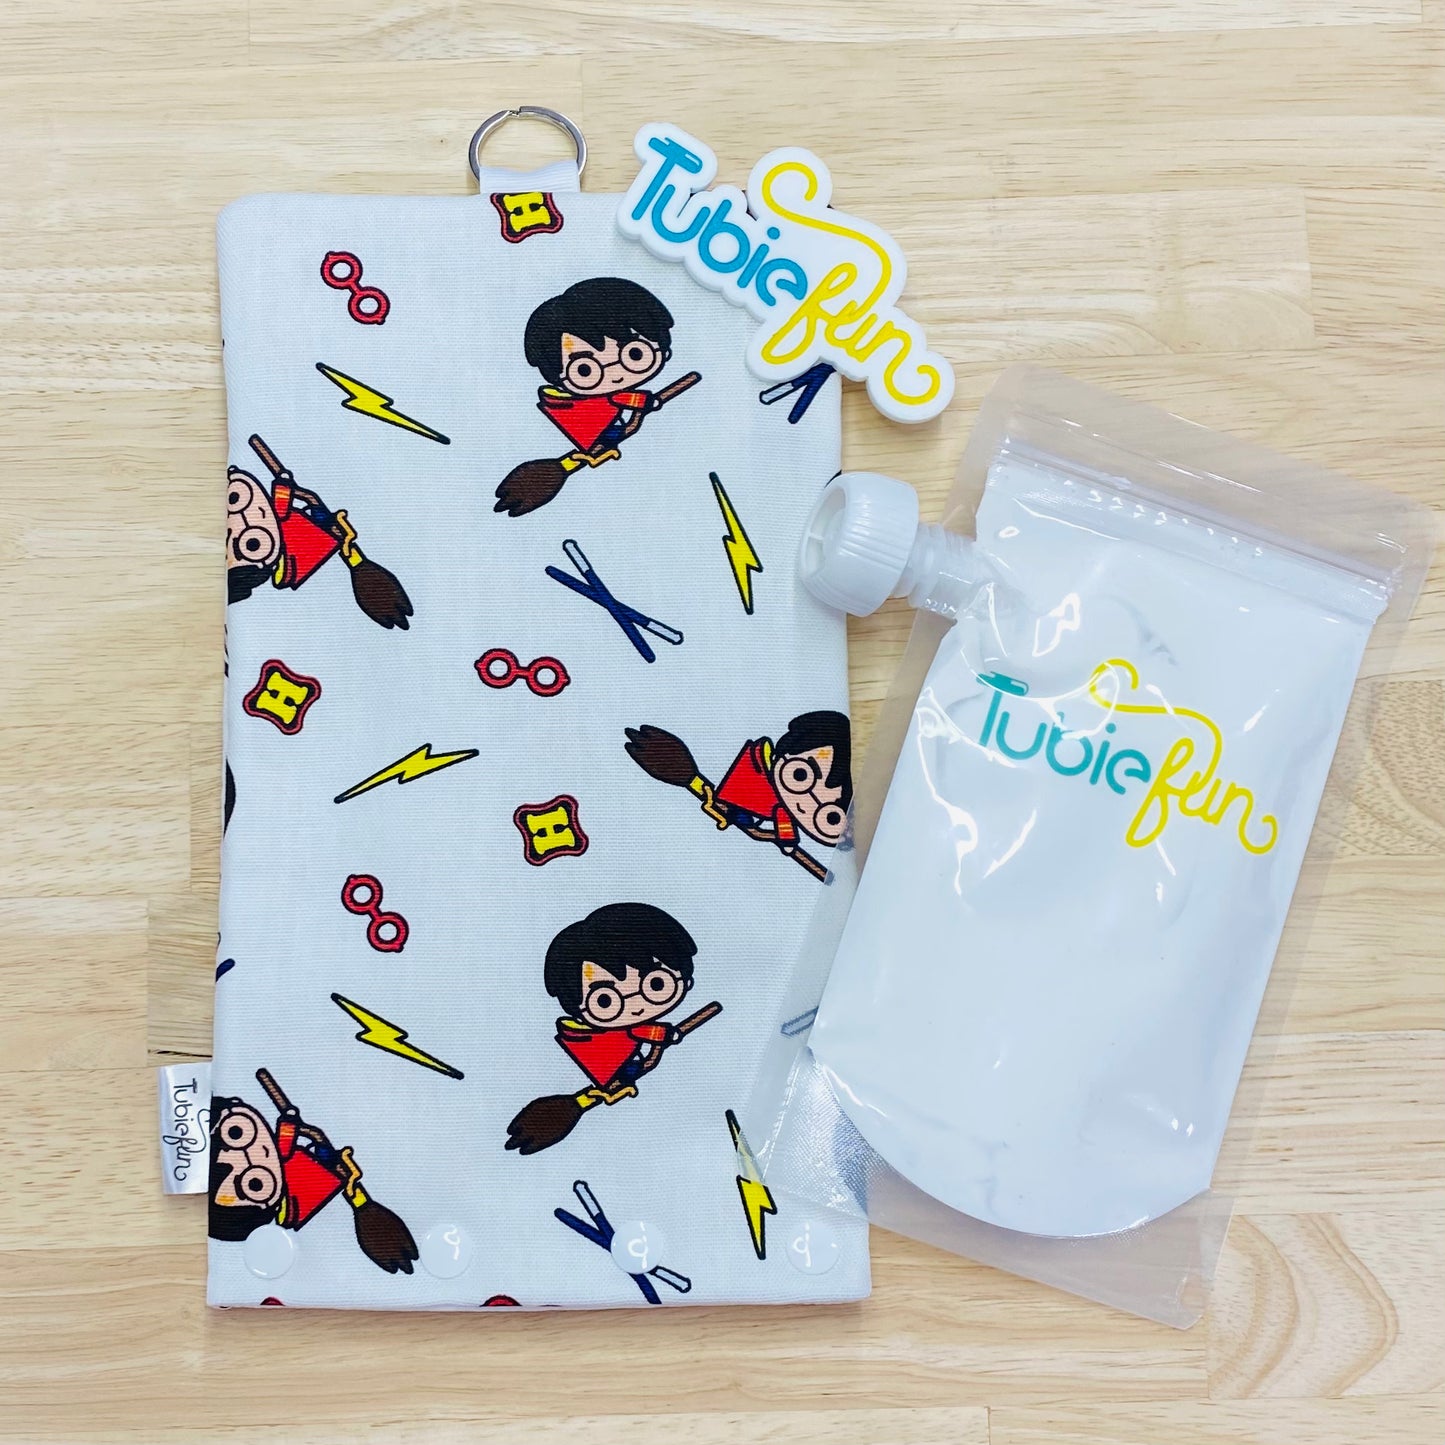 NEW Insulated Milk Bag Suitable for Tubie Fun 500ml Reusable Pouches - Flying wizard Boy